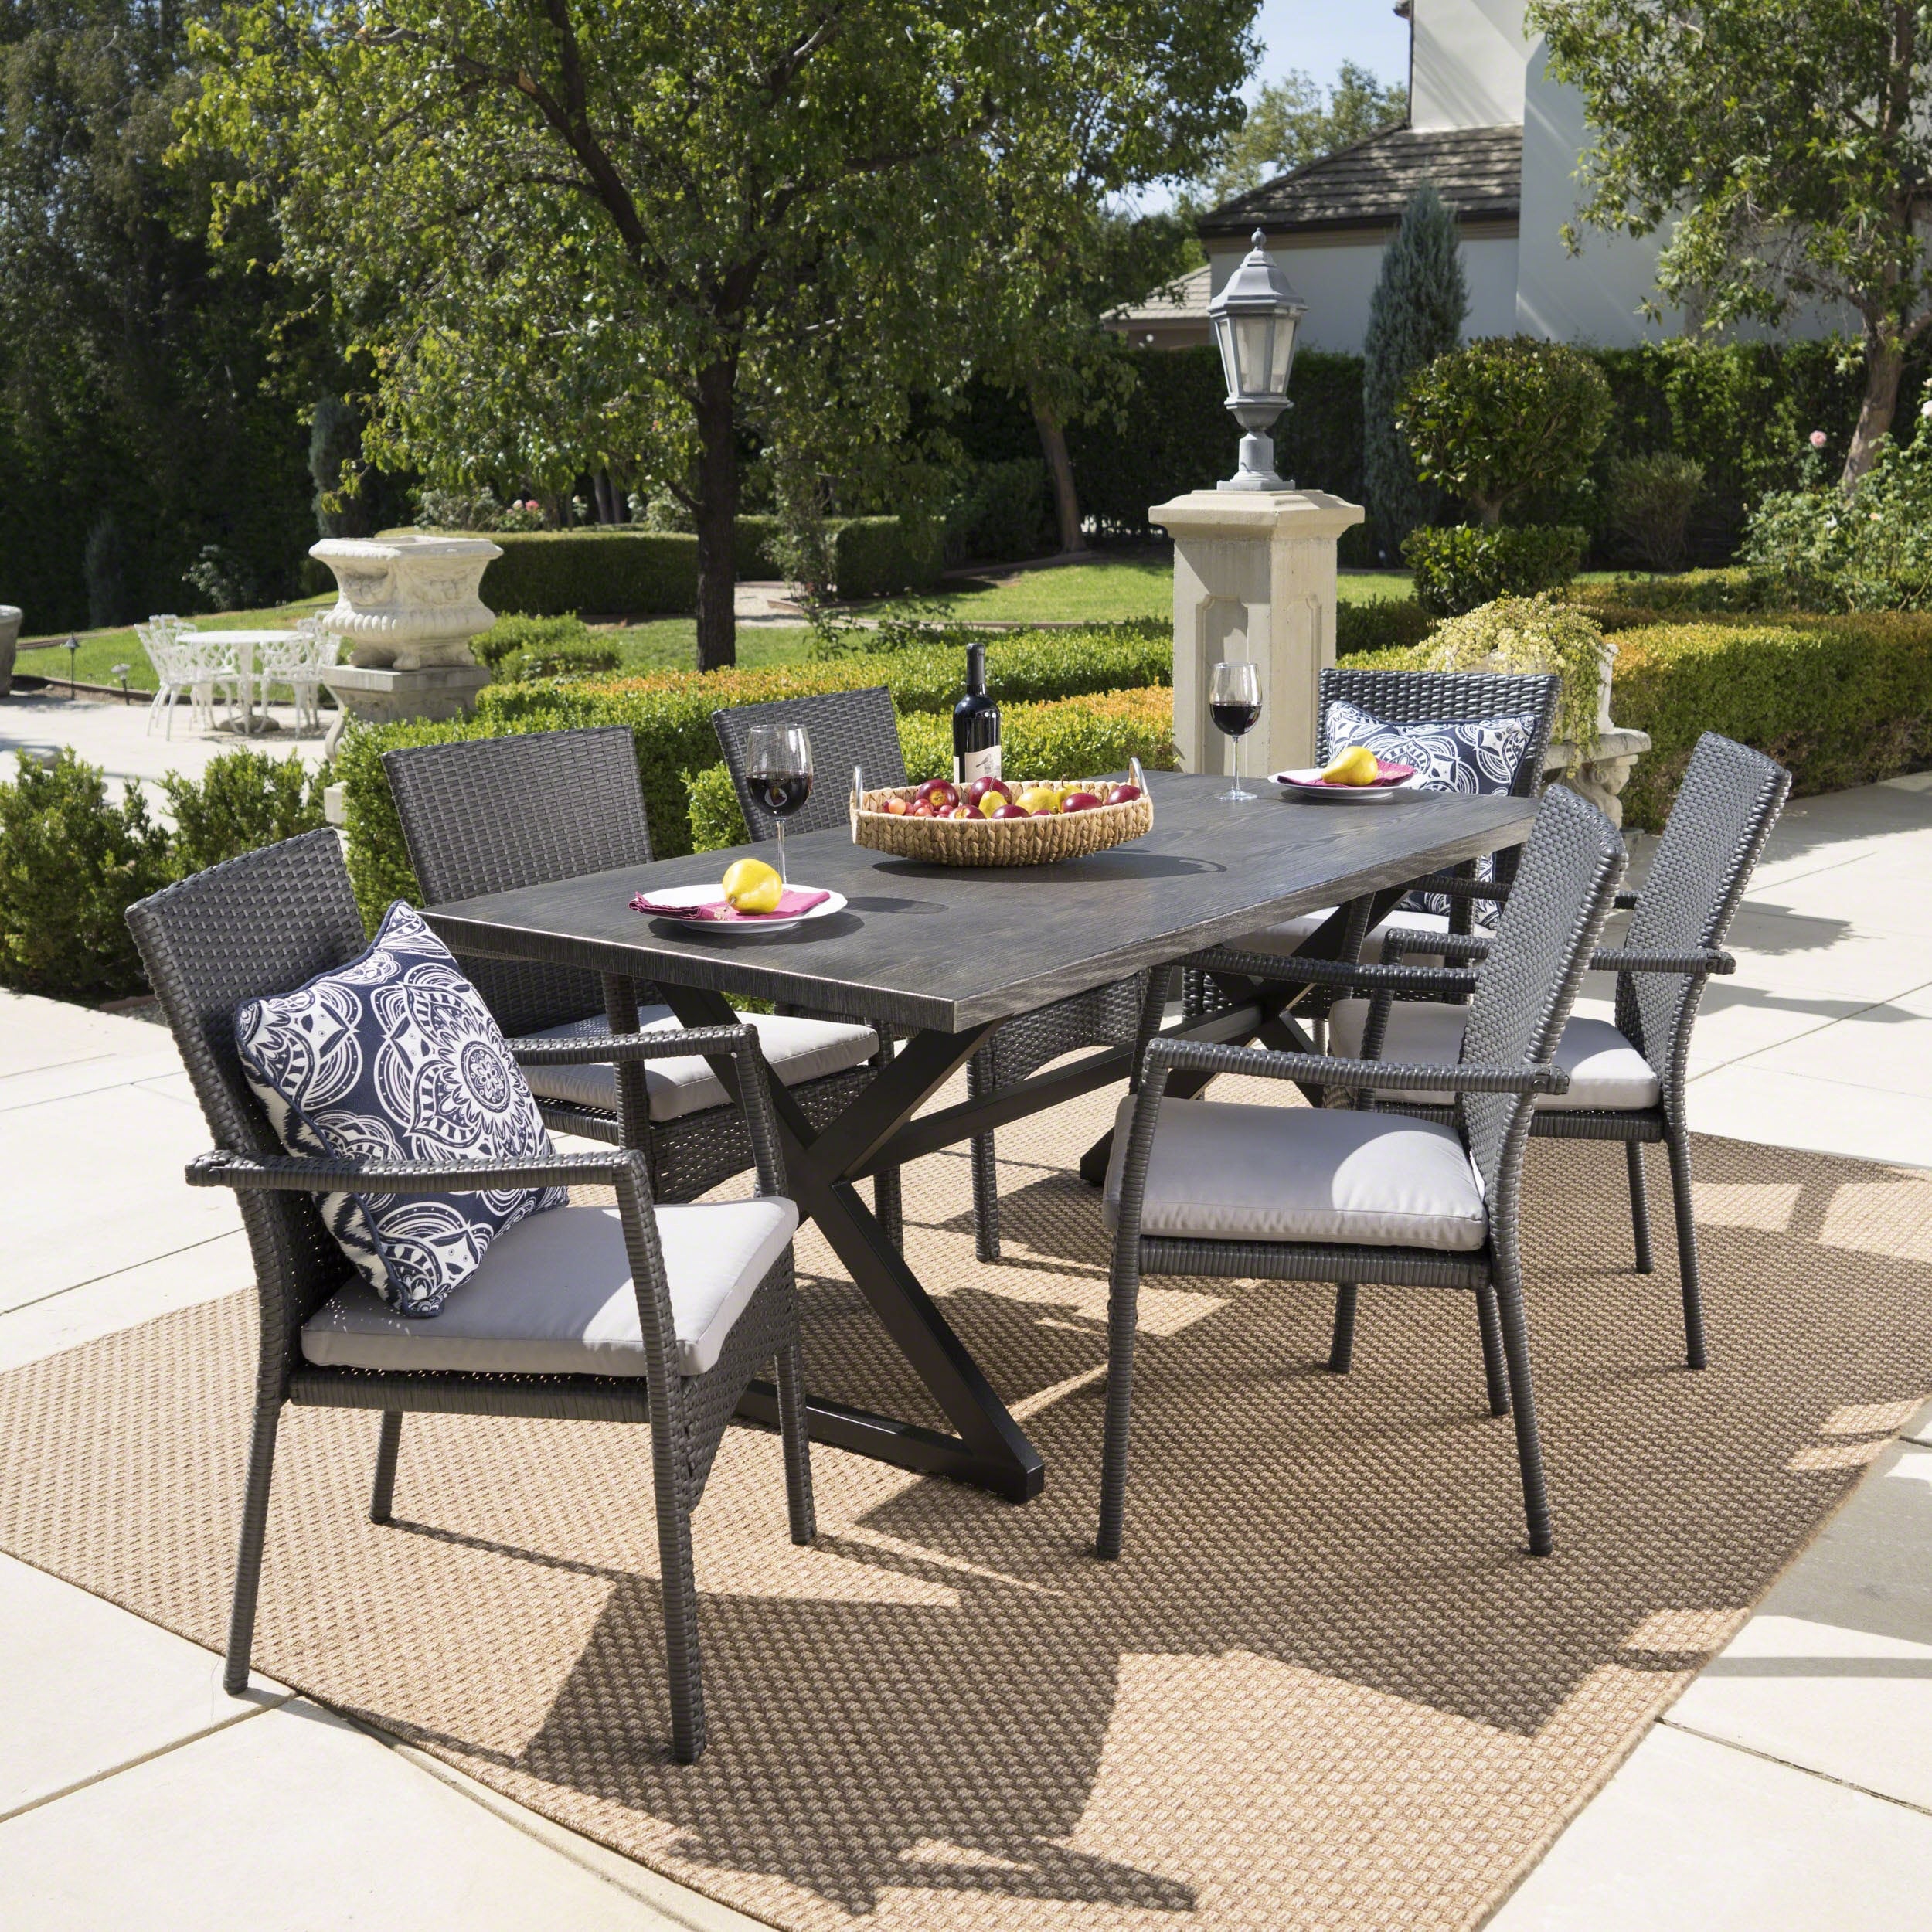 Adina 7-piece Wicker Aluminum Dining Set By Christopher Knight Home - N/a